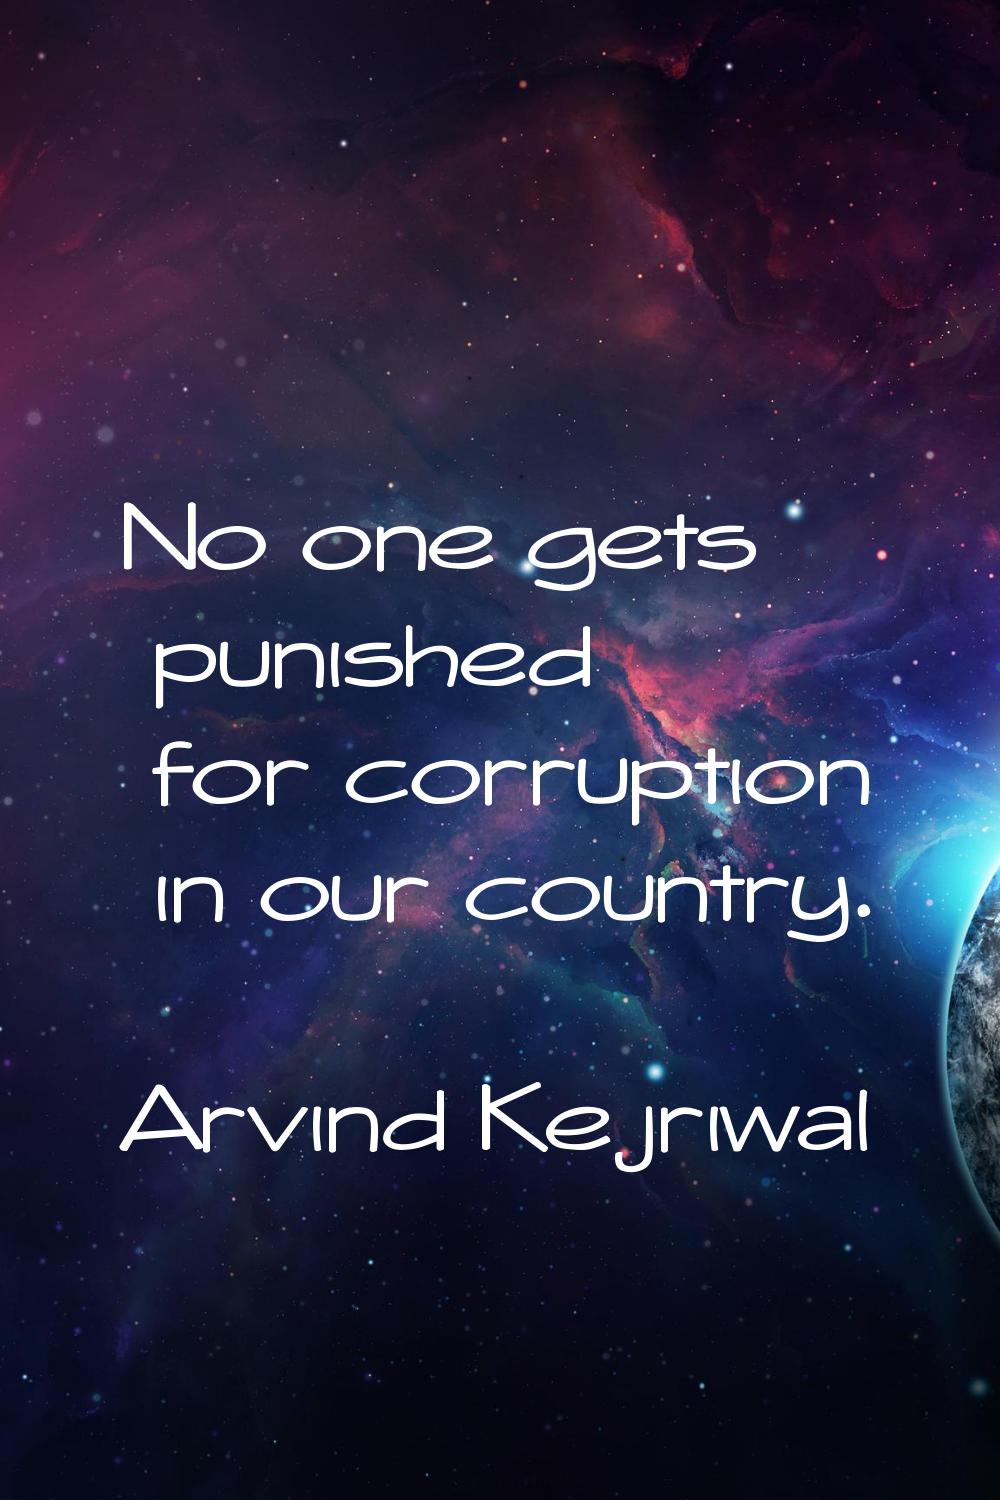 No one gets punished for corruption in our country.